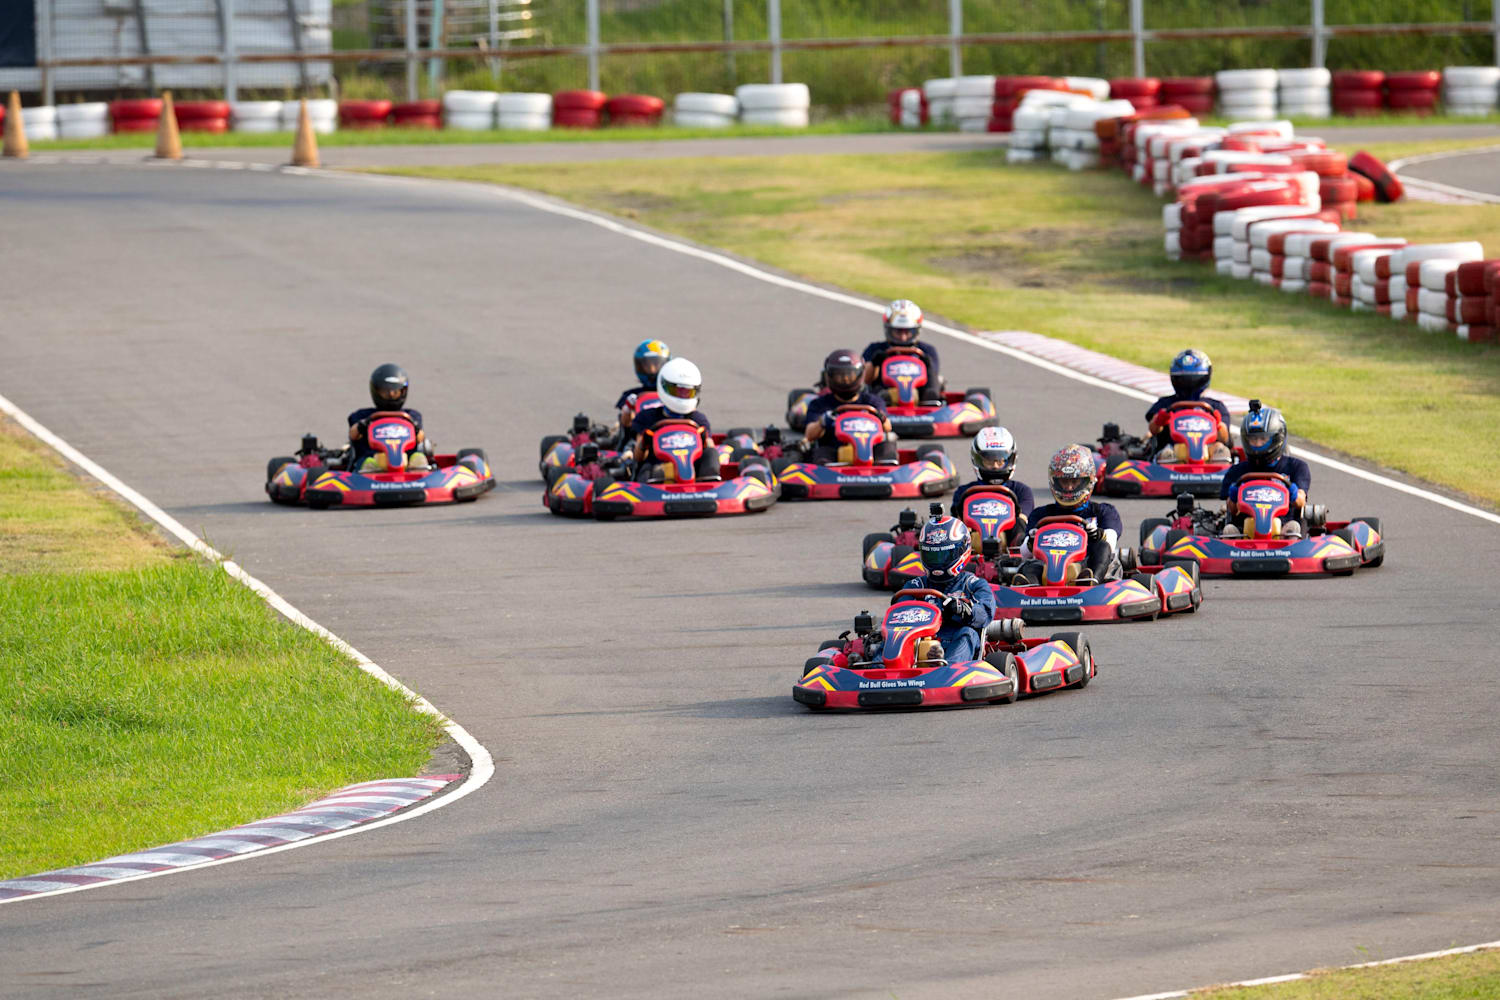 Gokarting 7 tips to get the perfect race start